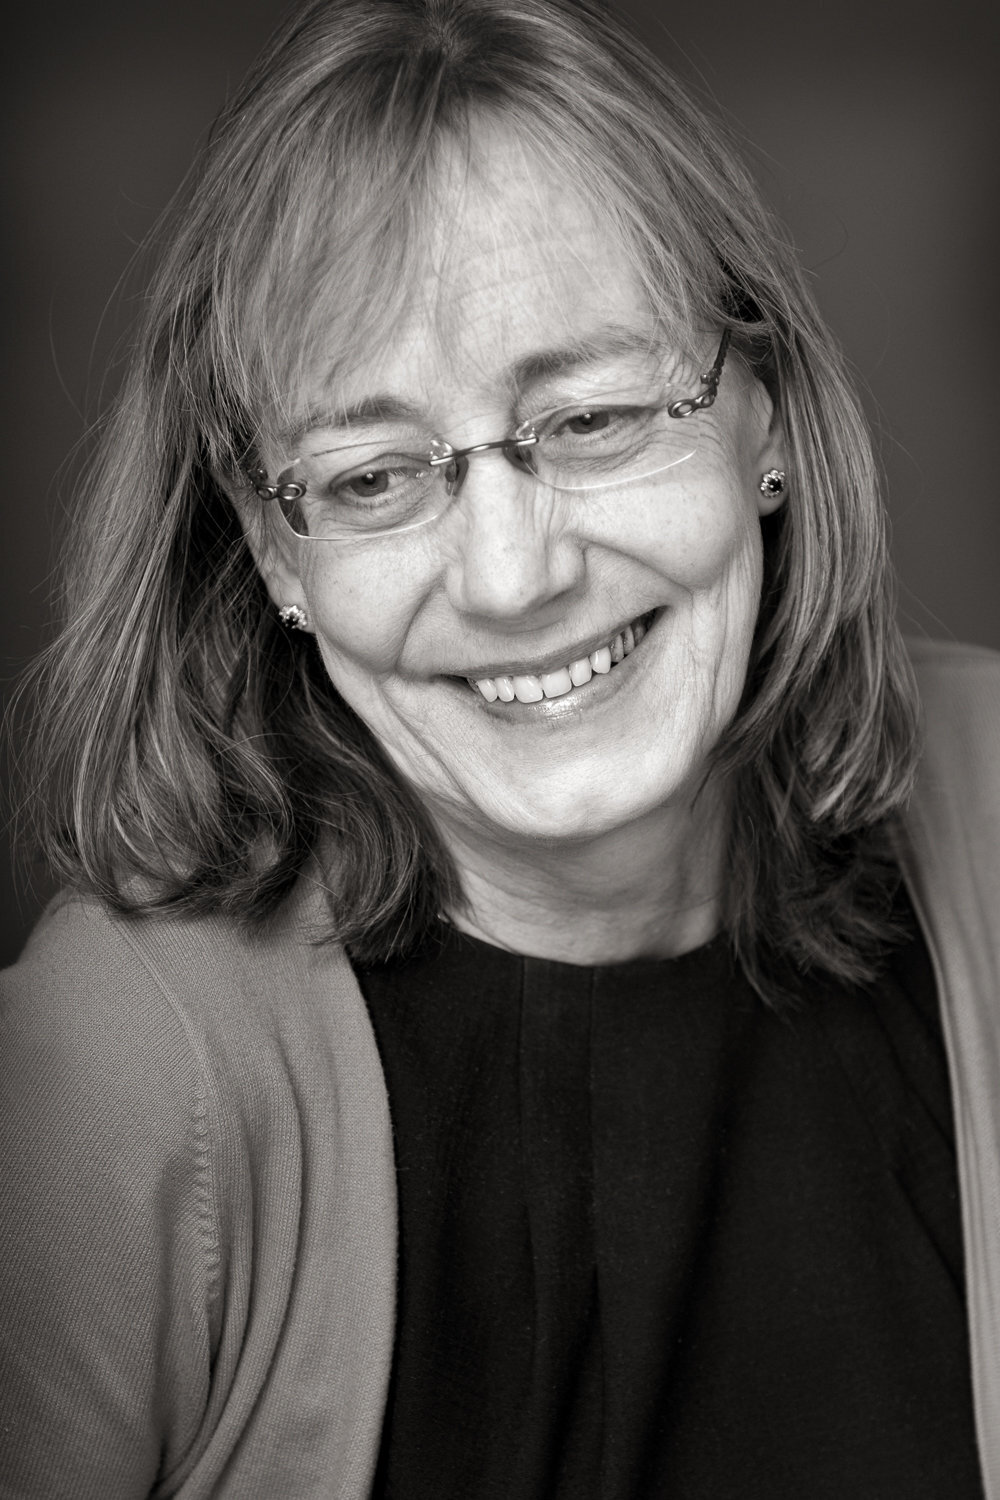 Black & white portrait of an  female  doctor wearing glasses and smiling